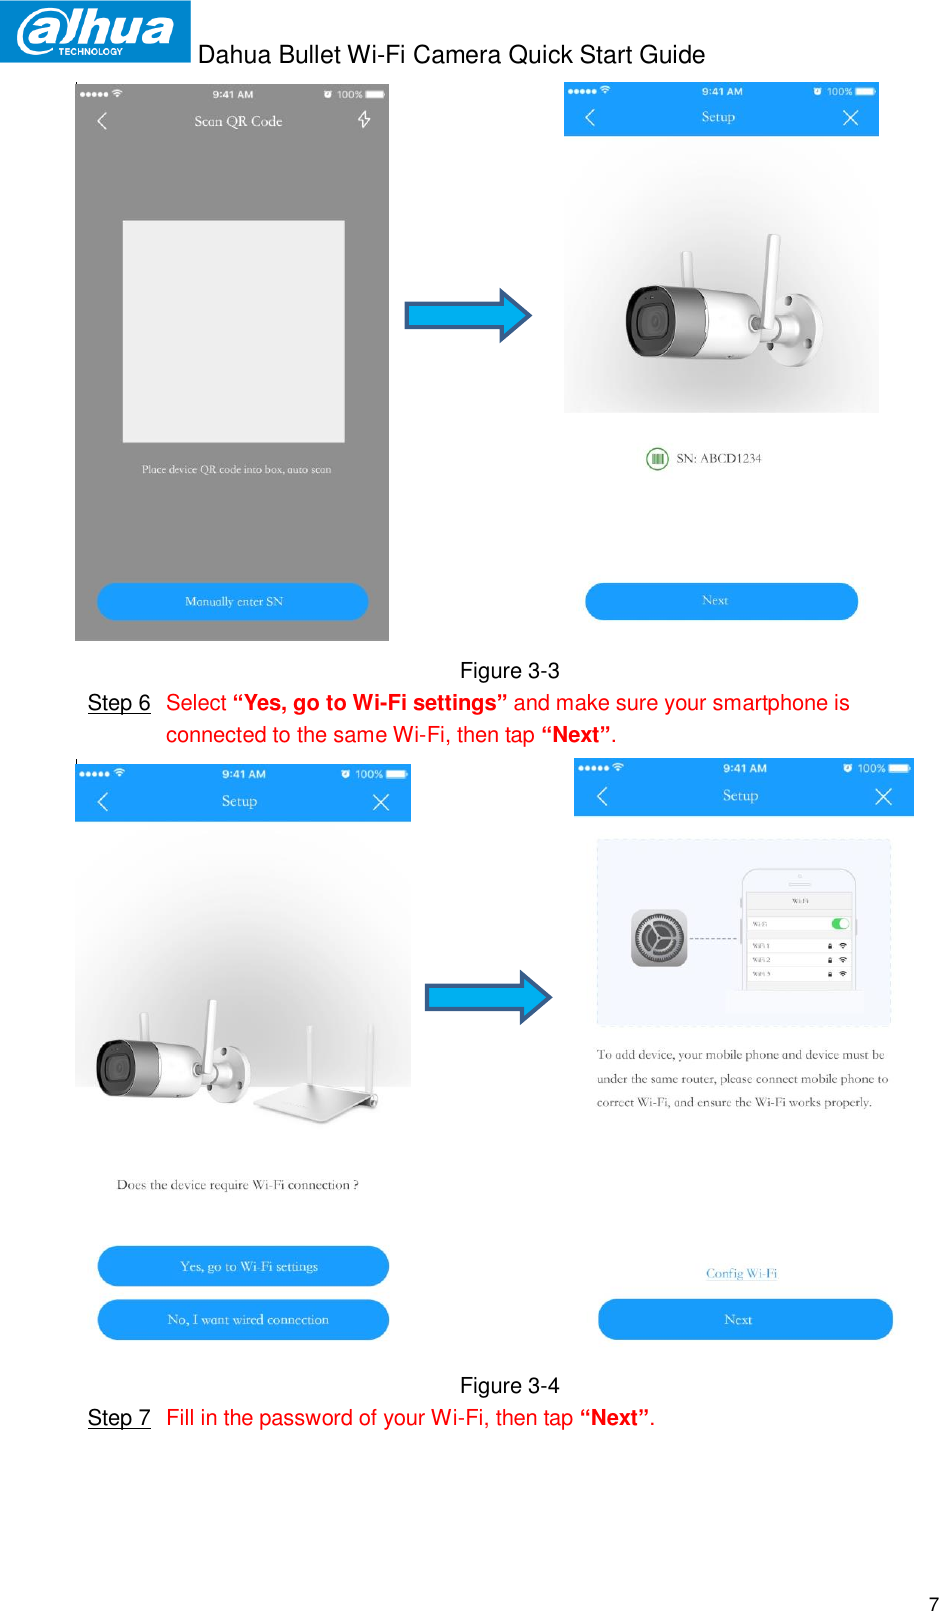  Dahua Bullet Wi-Fi Camera Quick Start Guide  7                                 Figure 3-3  Step 6  Select “Yes, go to Wi-Fi settings” and make sure your smartphone is connected to the same Wi-Fi, then tap “Next”.                               Figure 3-4  Step 7  Fill in the password of your Wi-Fi, then tap “Next”. 